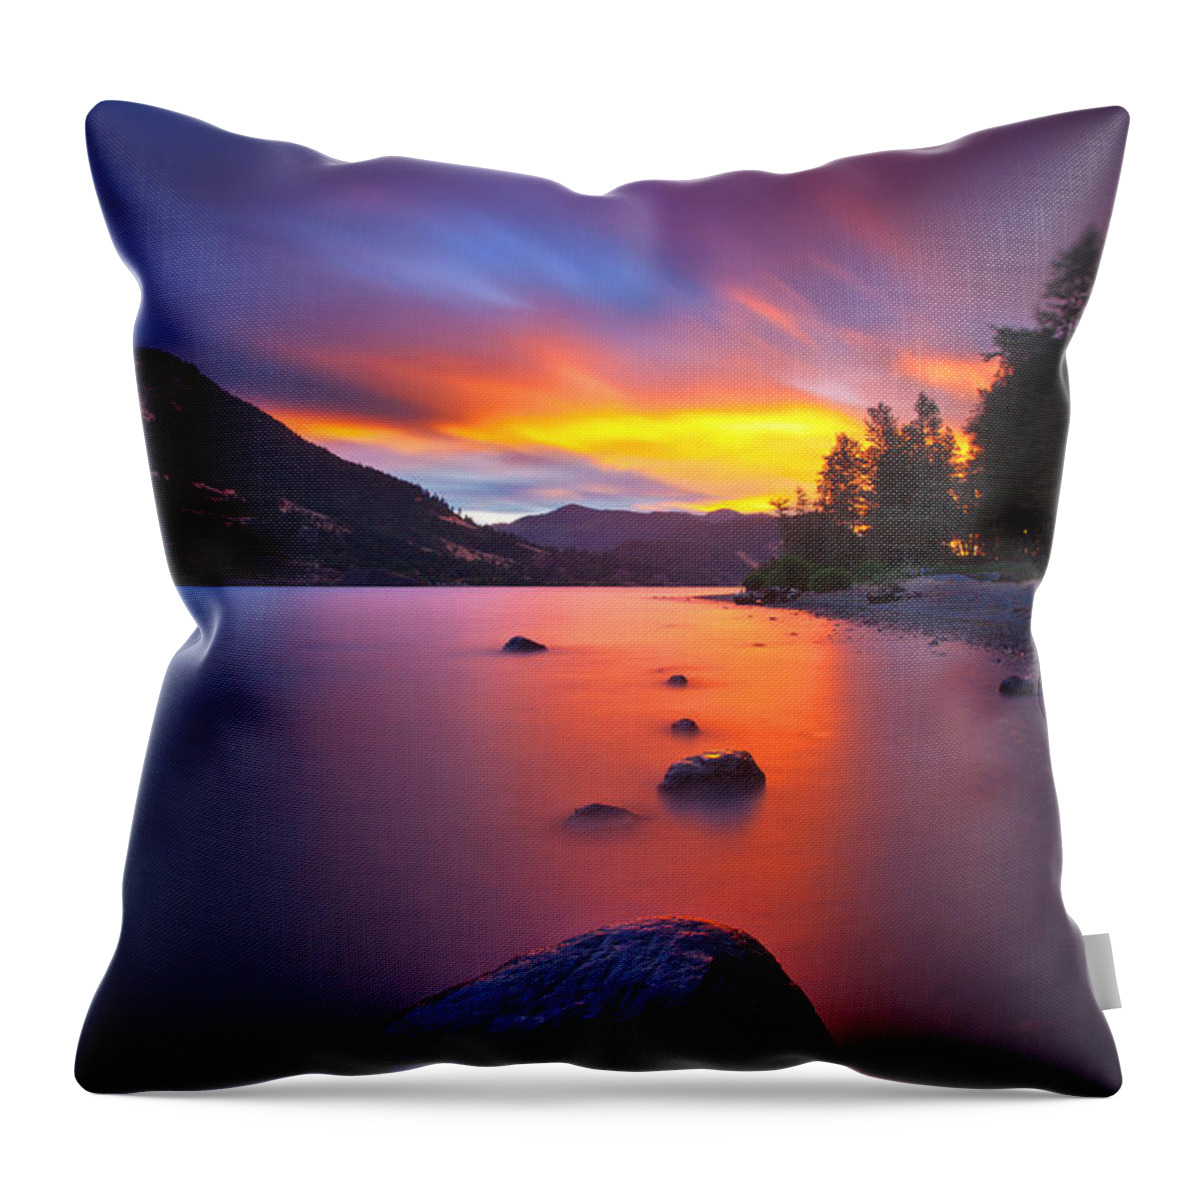 Sunset Throw Pillow featuring the photograph Columbia Morning Fire by Darren White